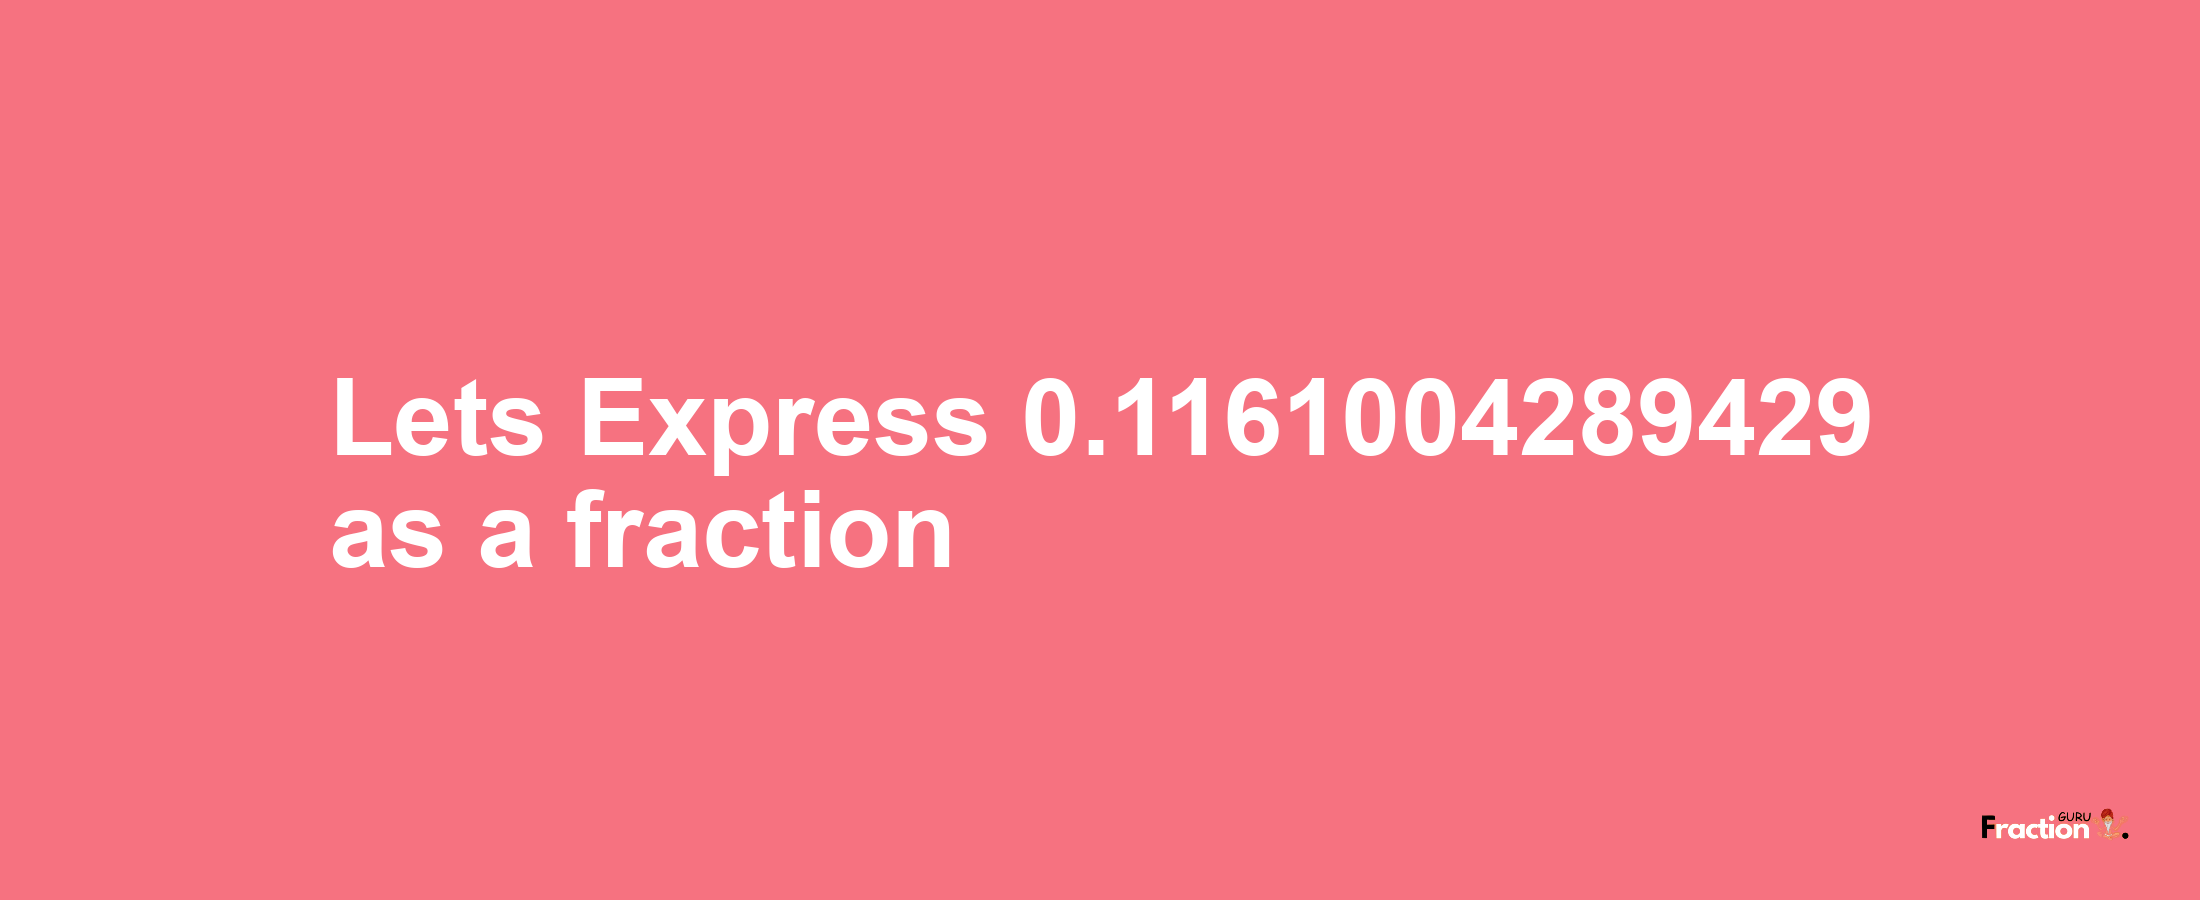 Lets Express 0.1161004289429 as afraction